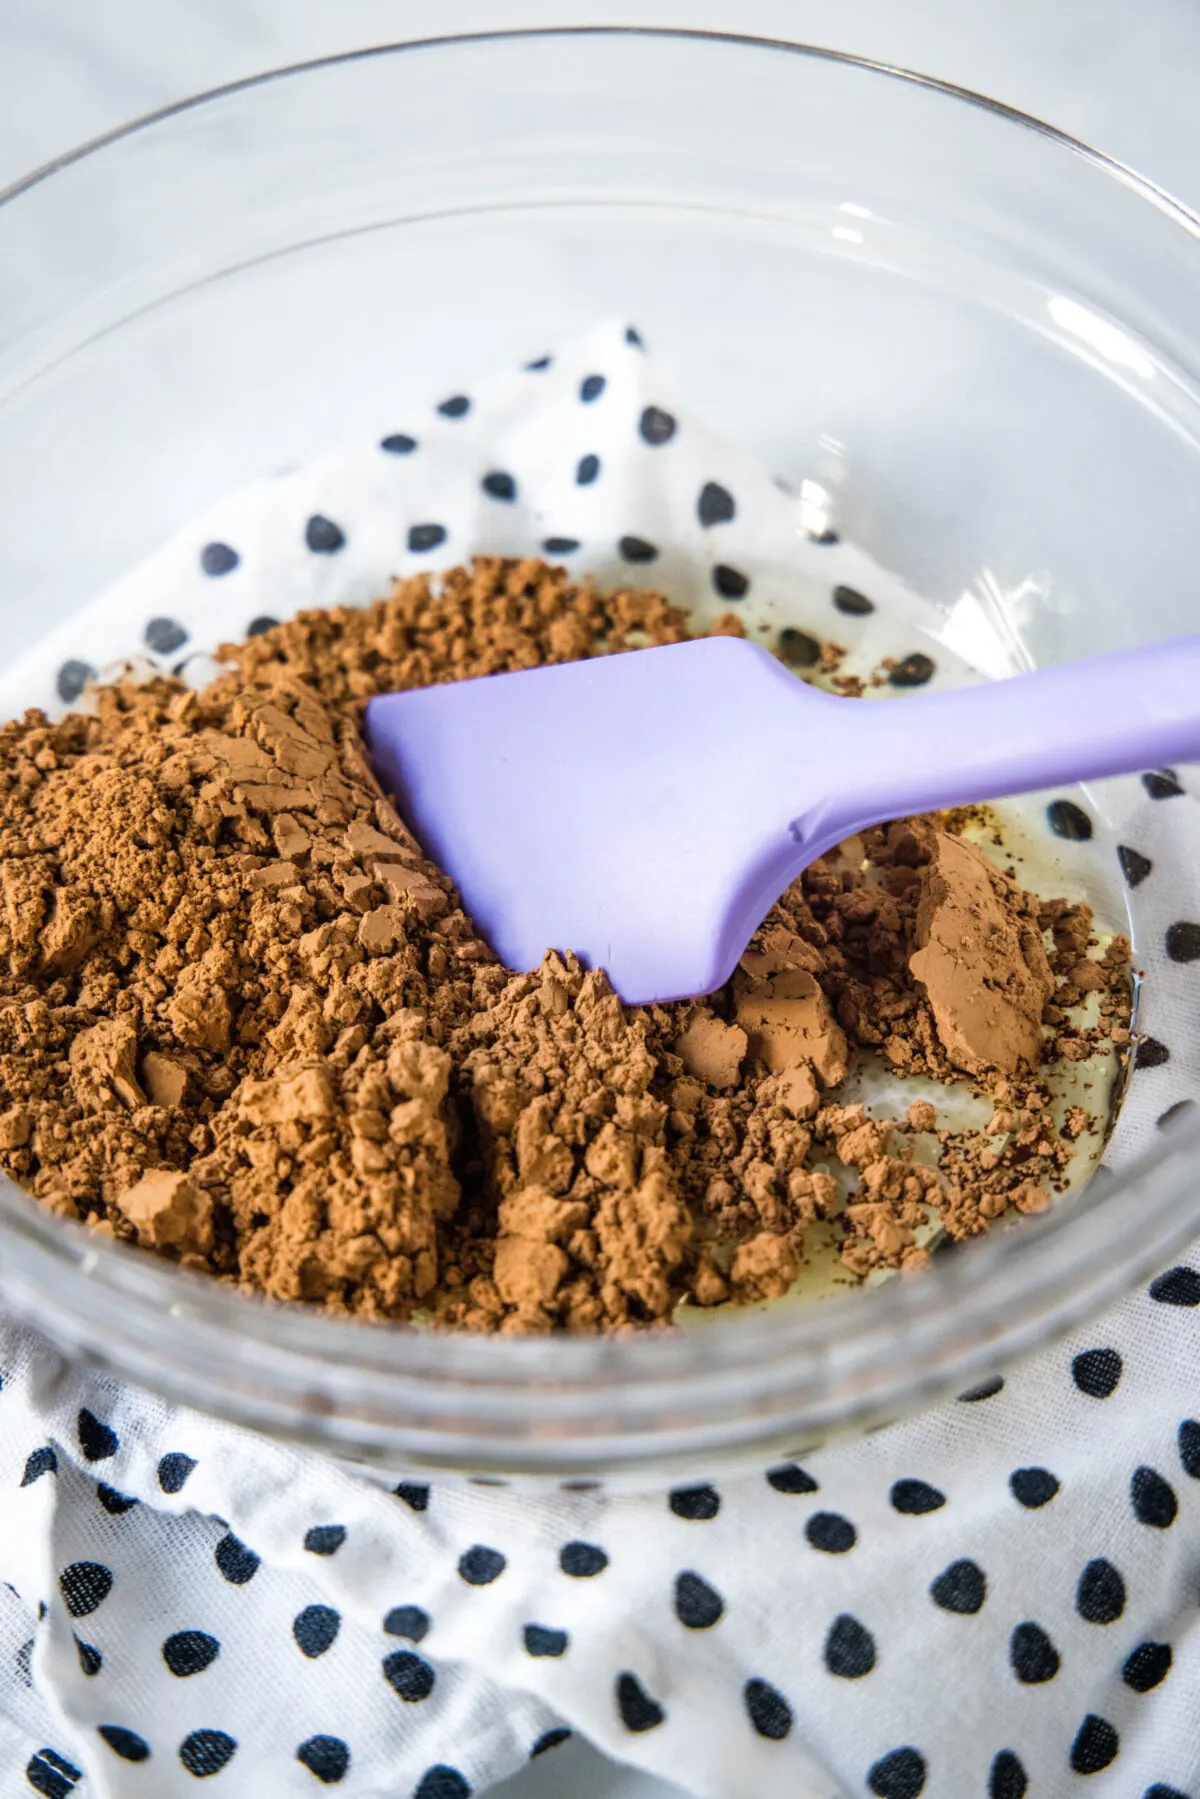 A mixing bowl with cocoa powder and a rubber spatula.